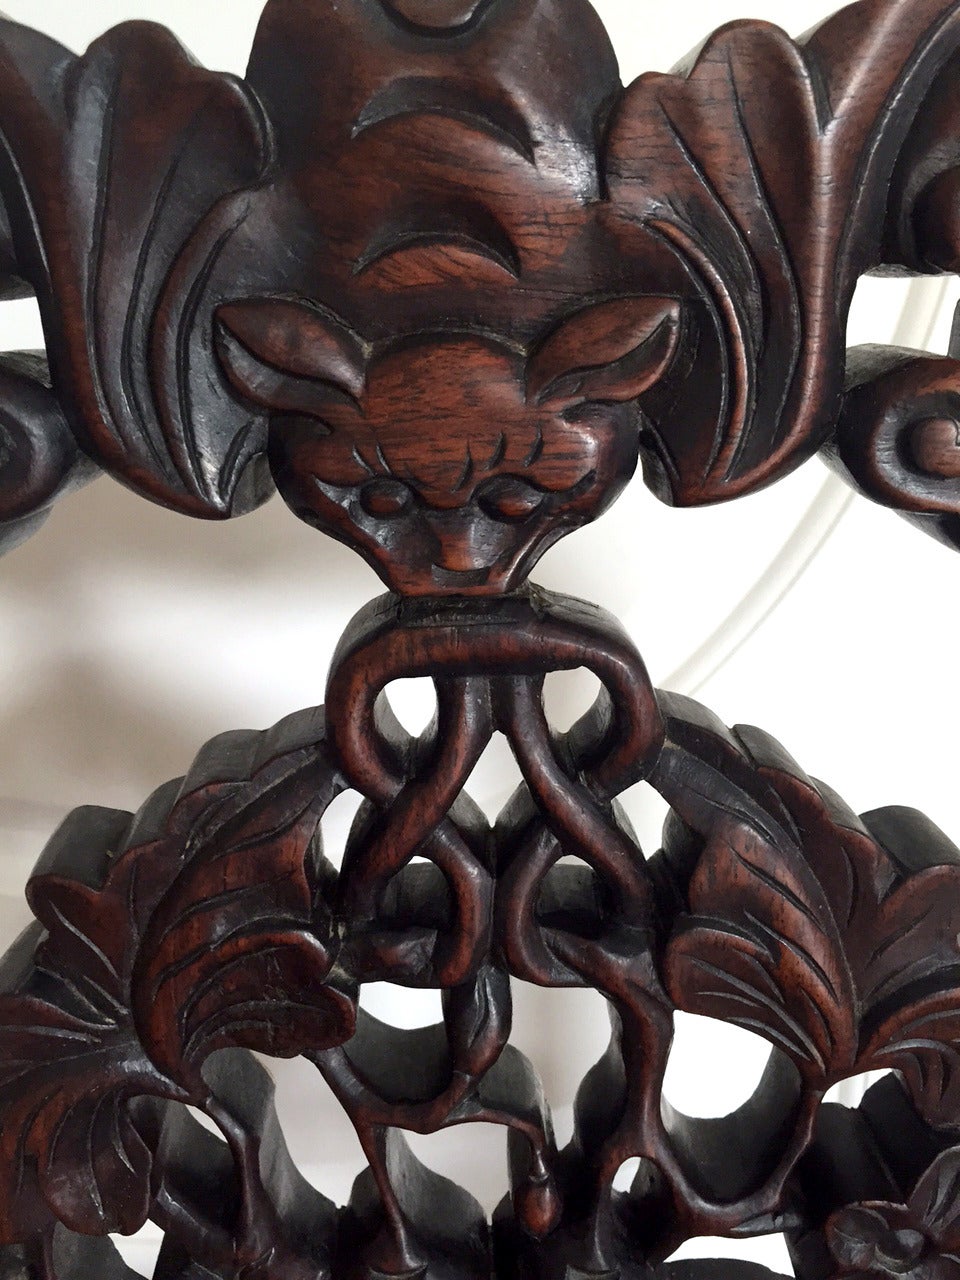 A pair of antique side Chinese side chairs circa 19th century. Made from highly grained HongMu, a hard wood that resembles the Chinese rosewood, Huanghuali. These chairs feature a craved back support with longevity symbols such as bats, fungi and